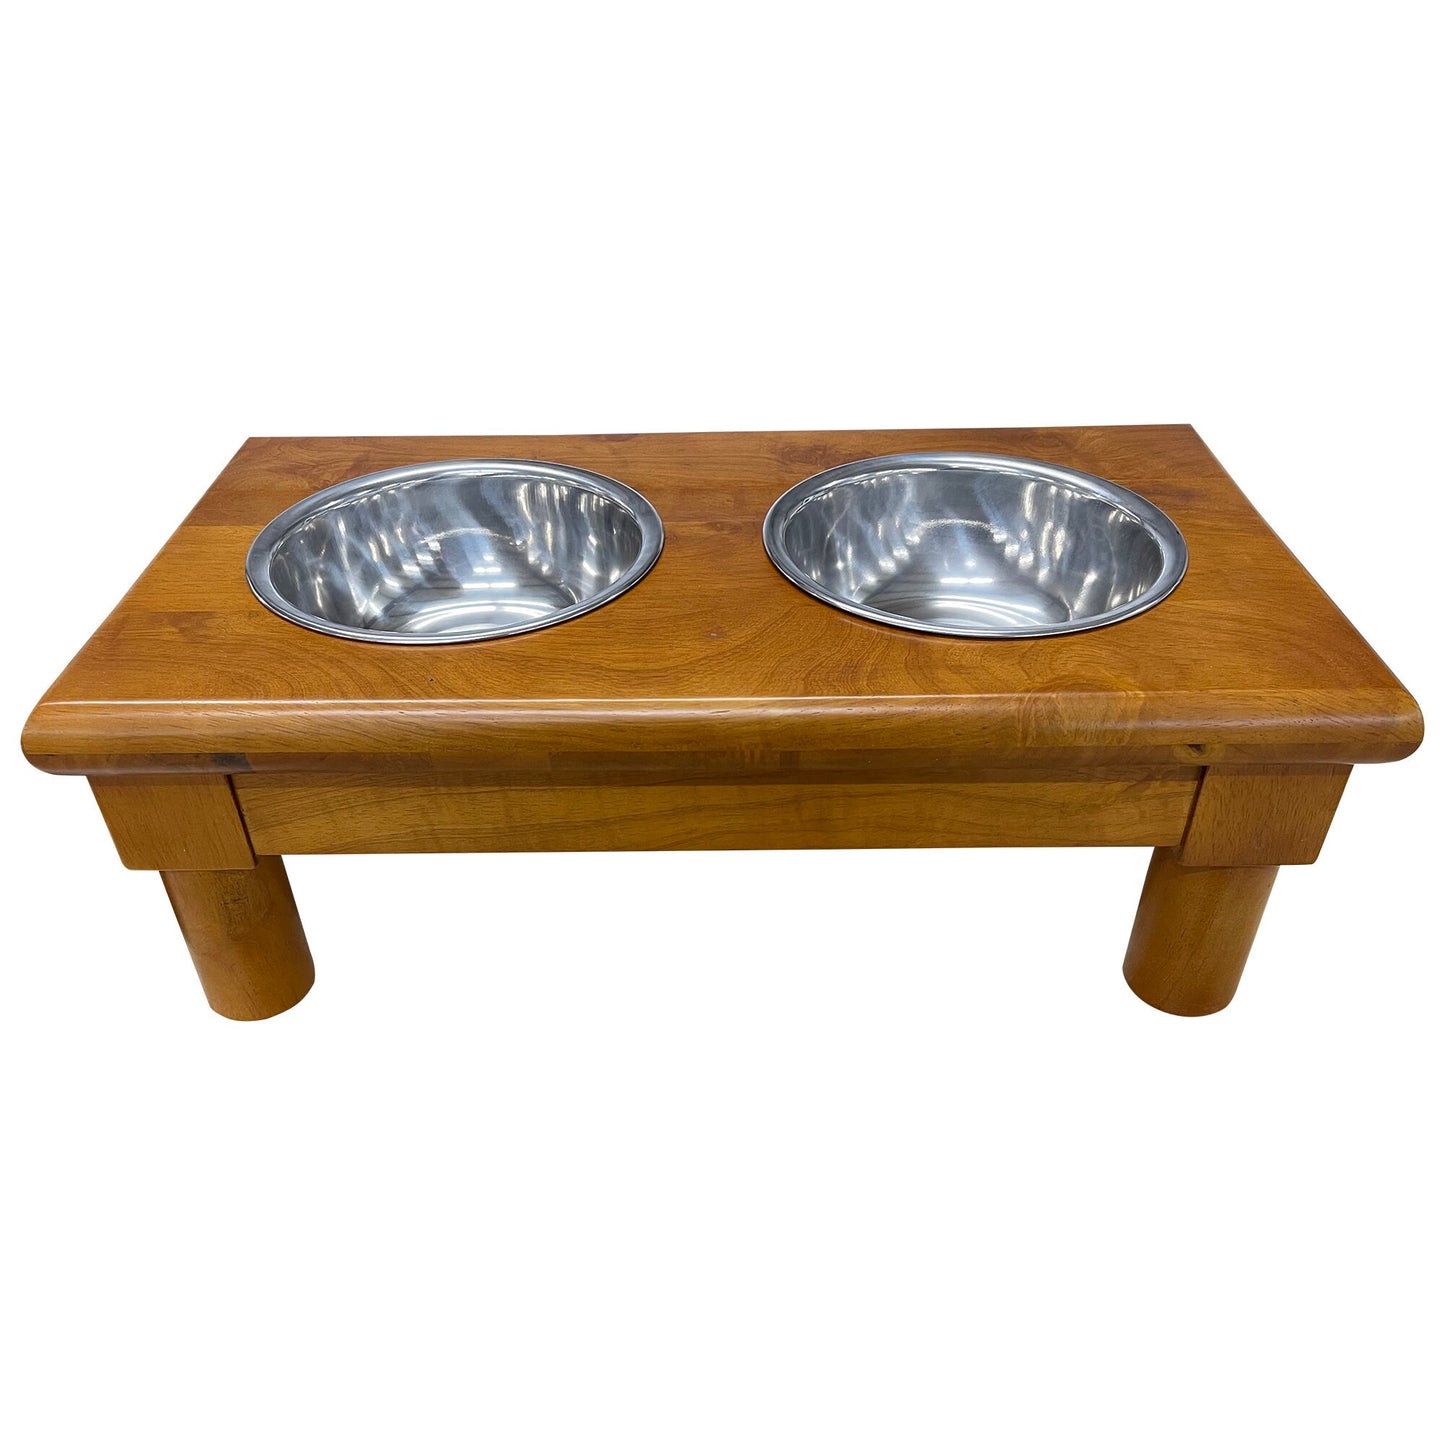 Mid Century Modern Dog Bowl with Stand, Two Bowls for Food and Water, Puppy to Adult Transition Set